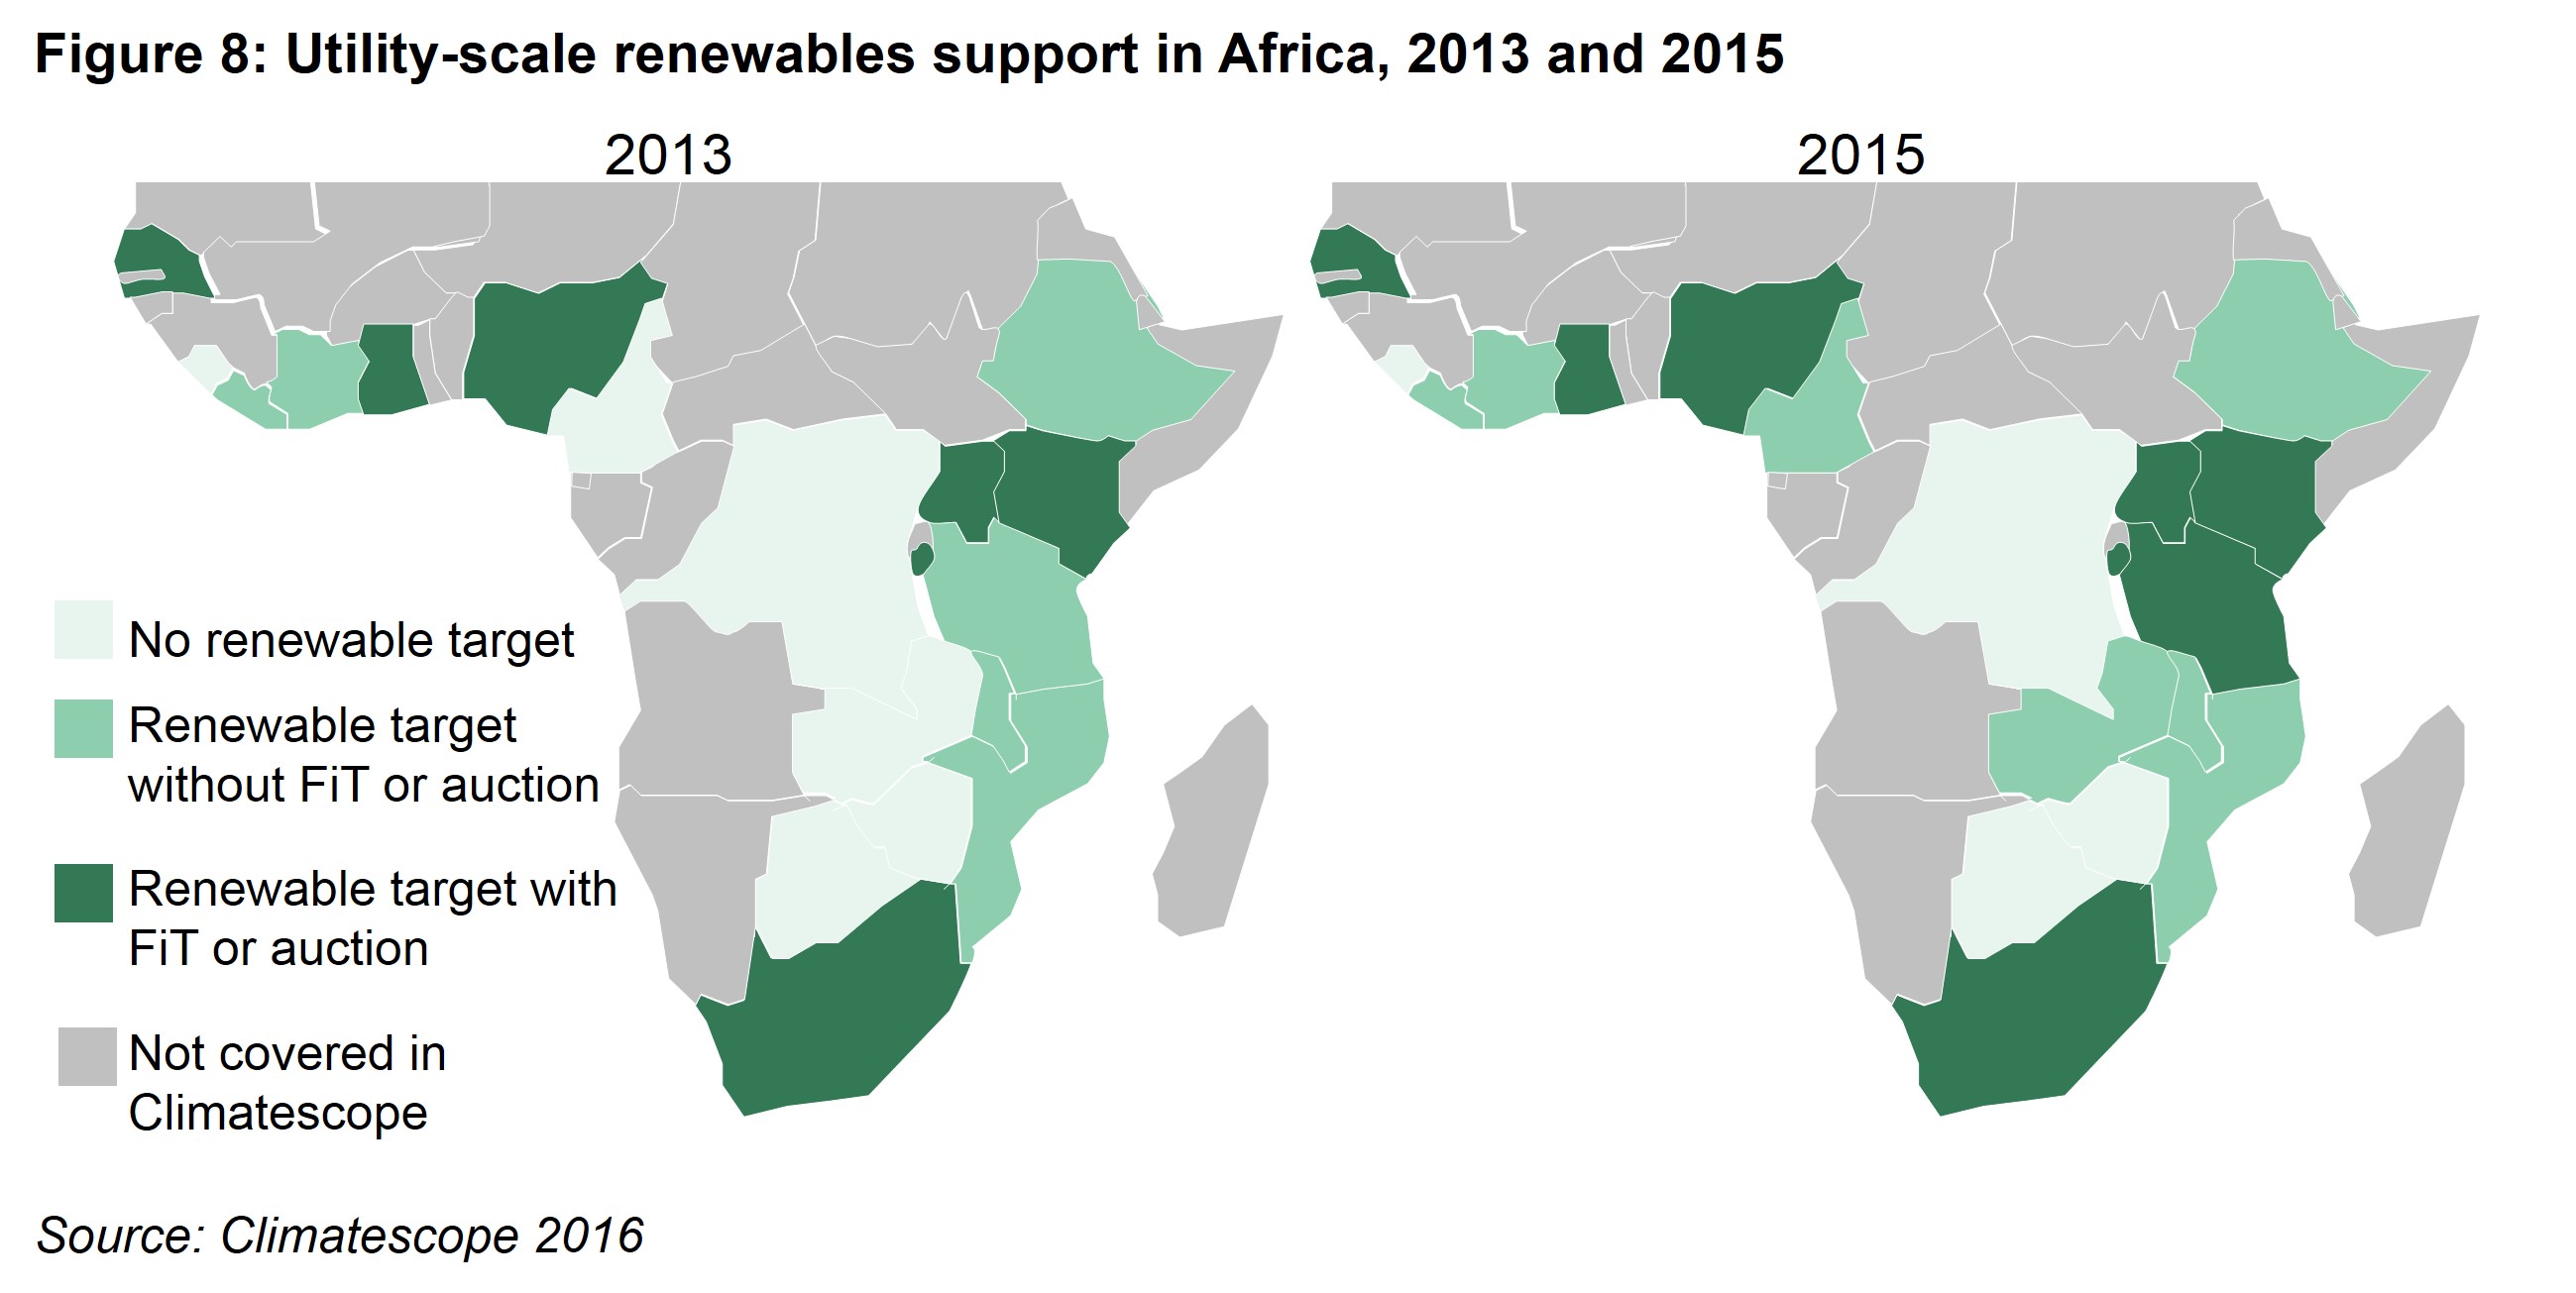 AM Fig 8 - Utility-scale renewables support in Africa, 2013 